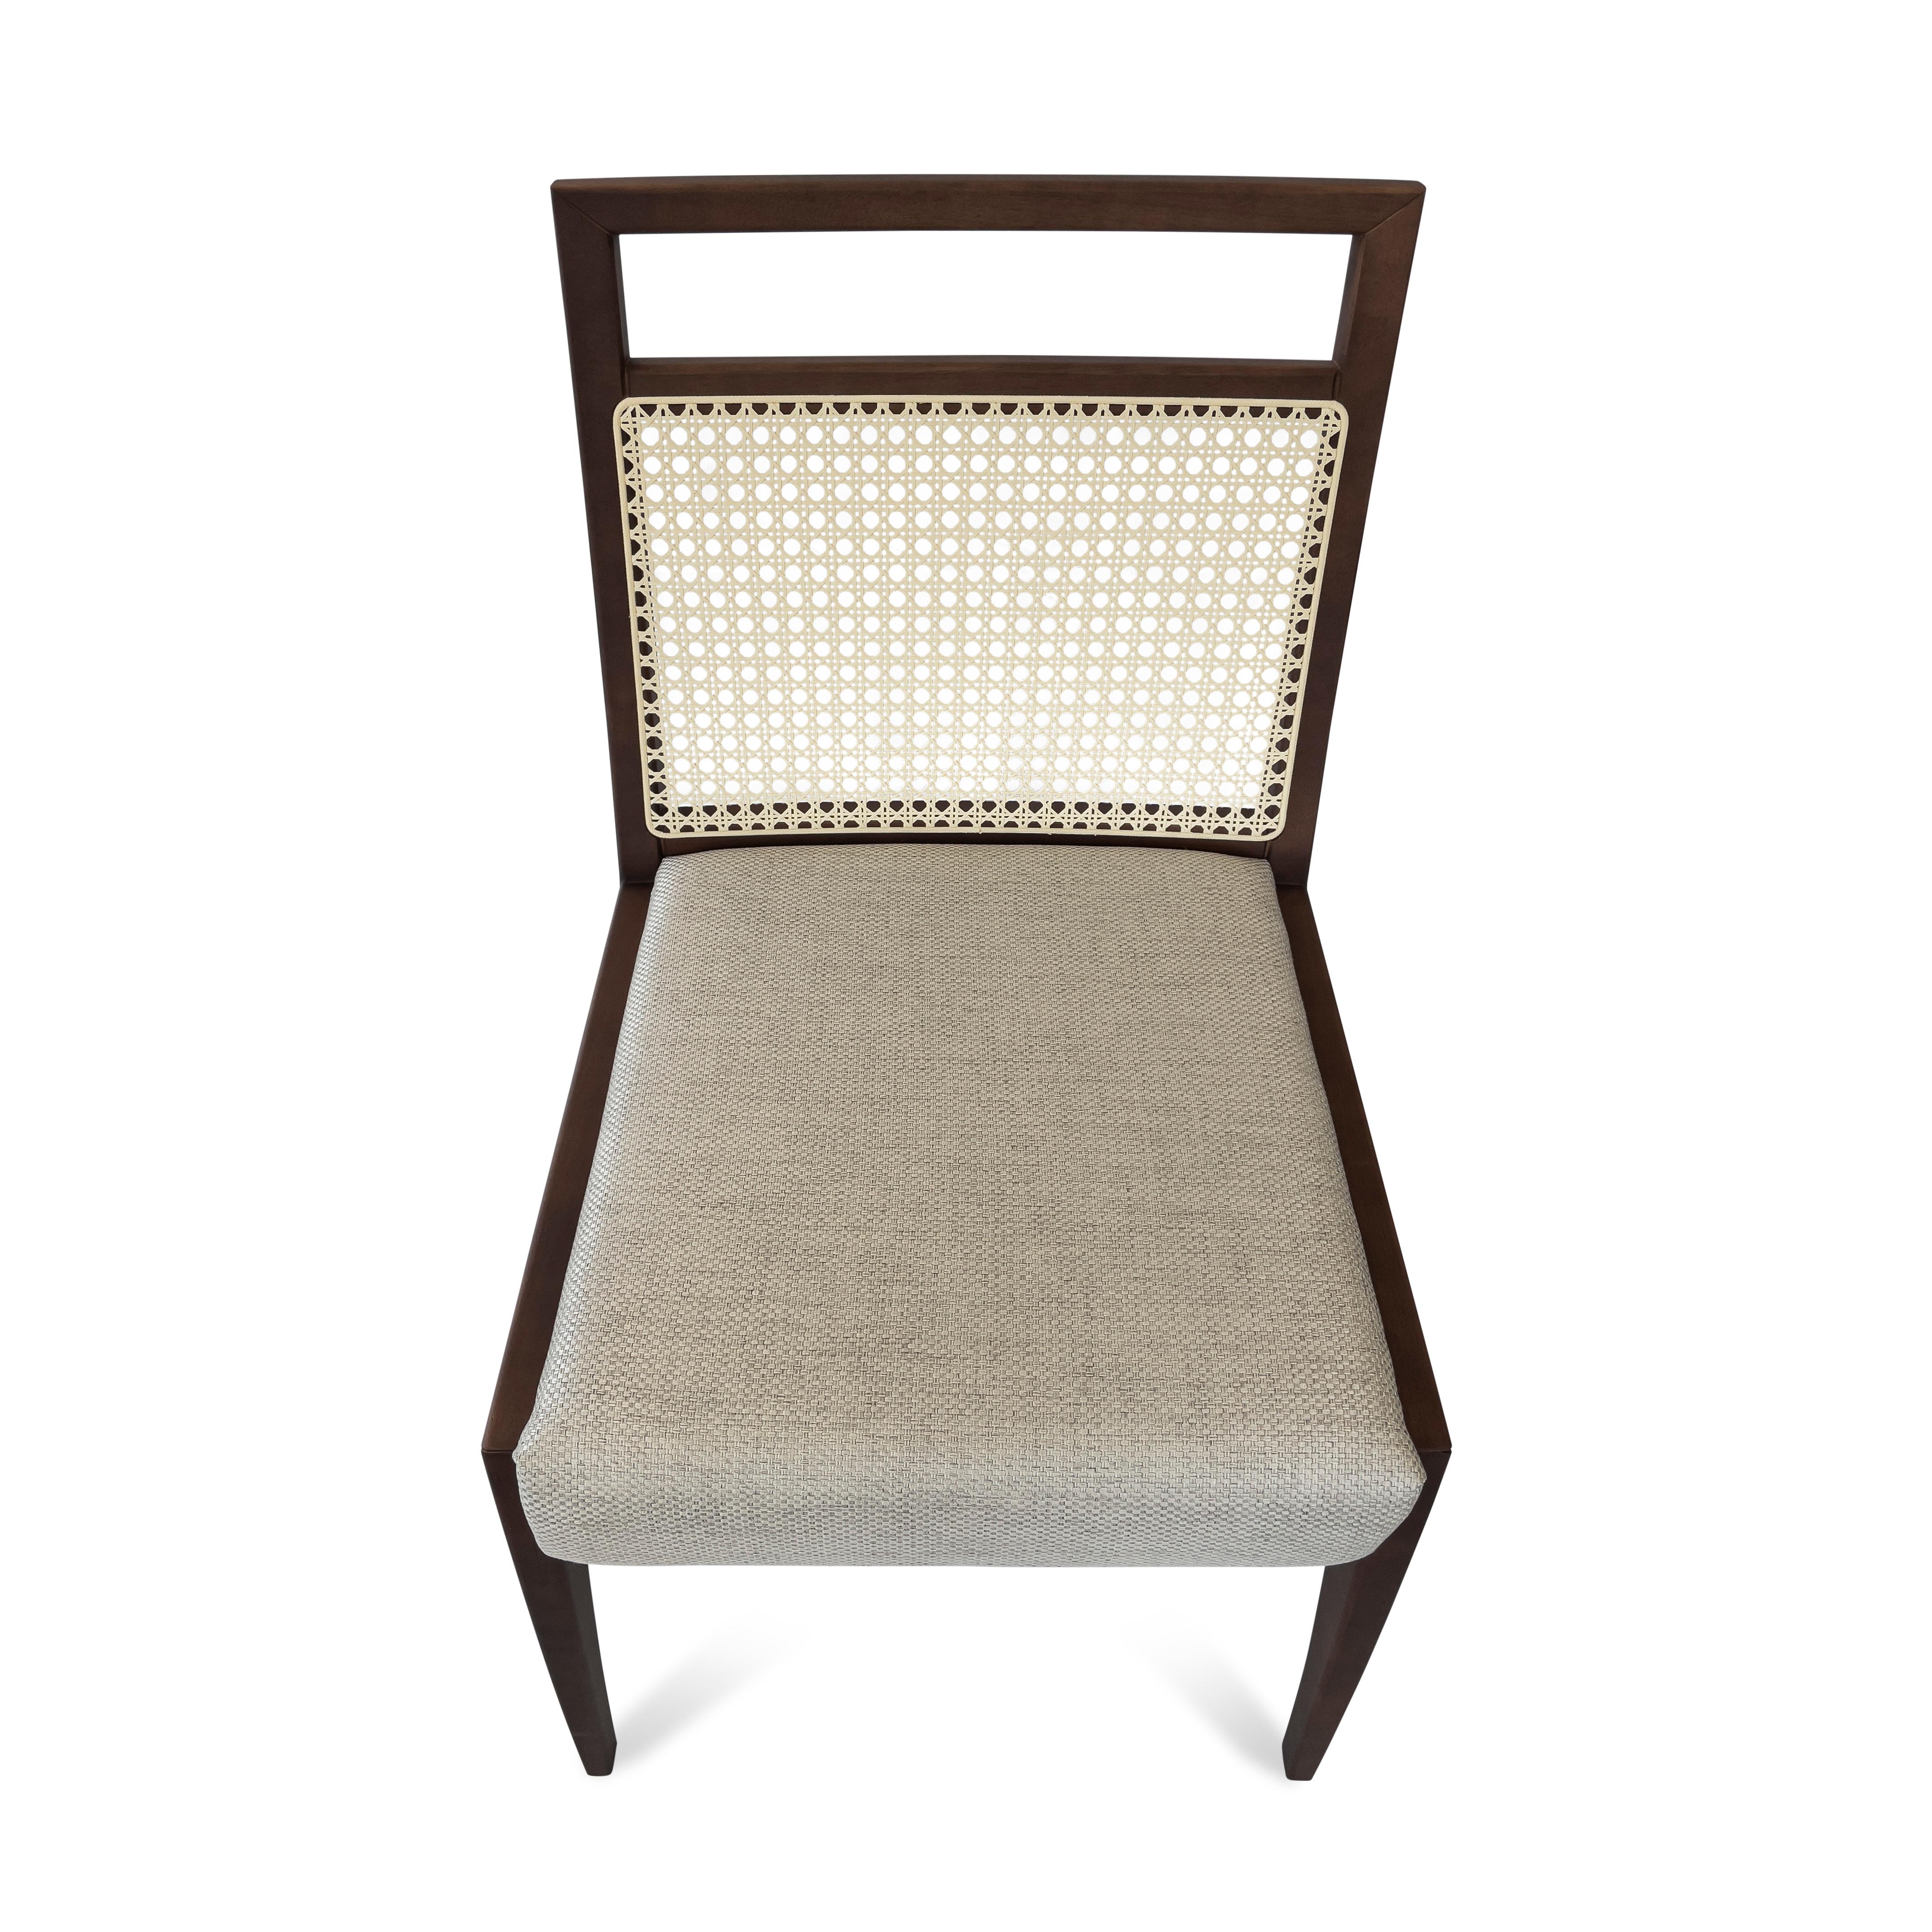 Brazilian Sotto Cane-Back Dining Chair in Walnut Wood Finish with Oatmeal Fabric, Set of 2 For Sale